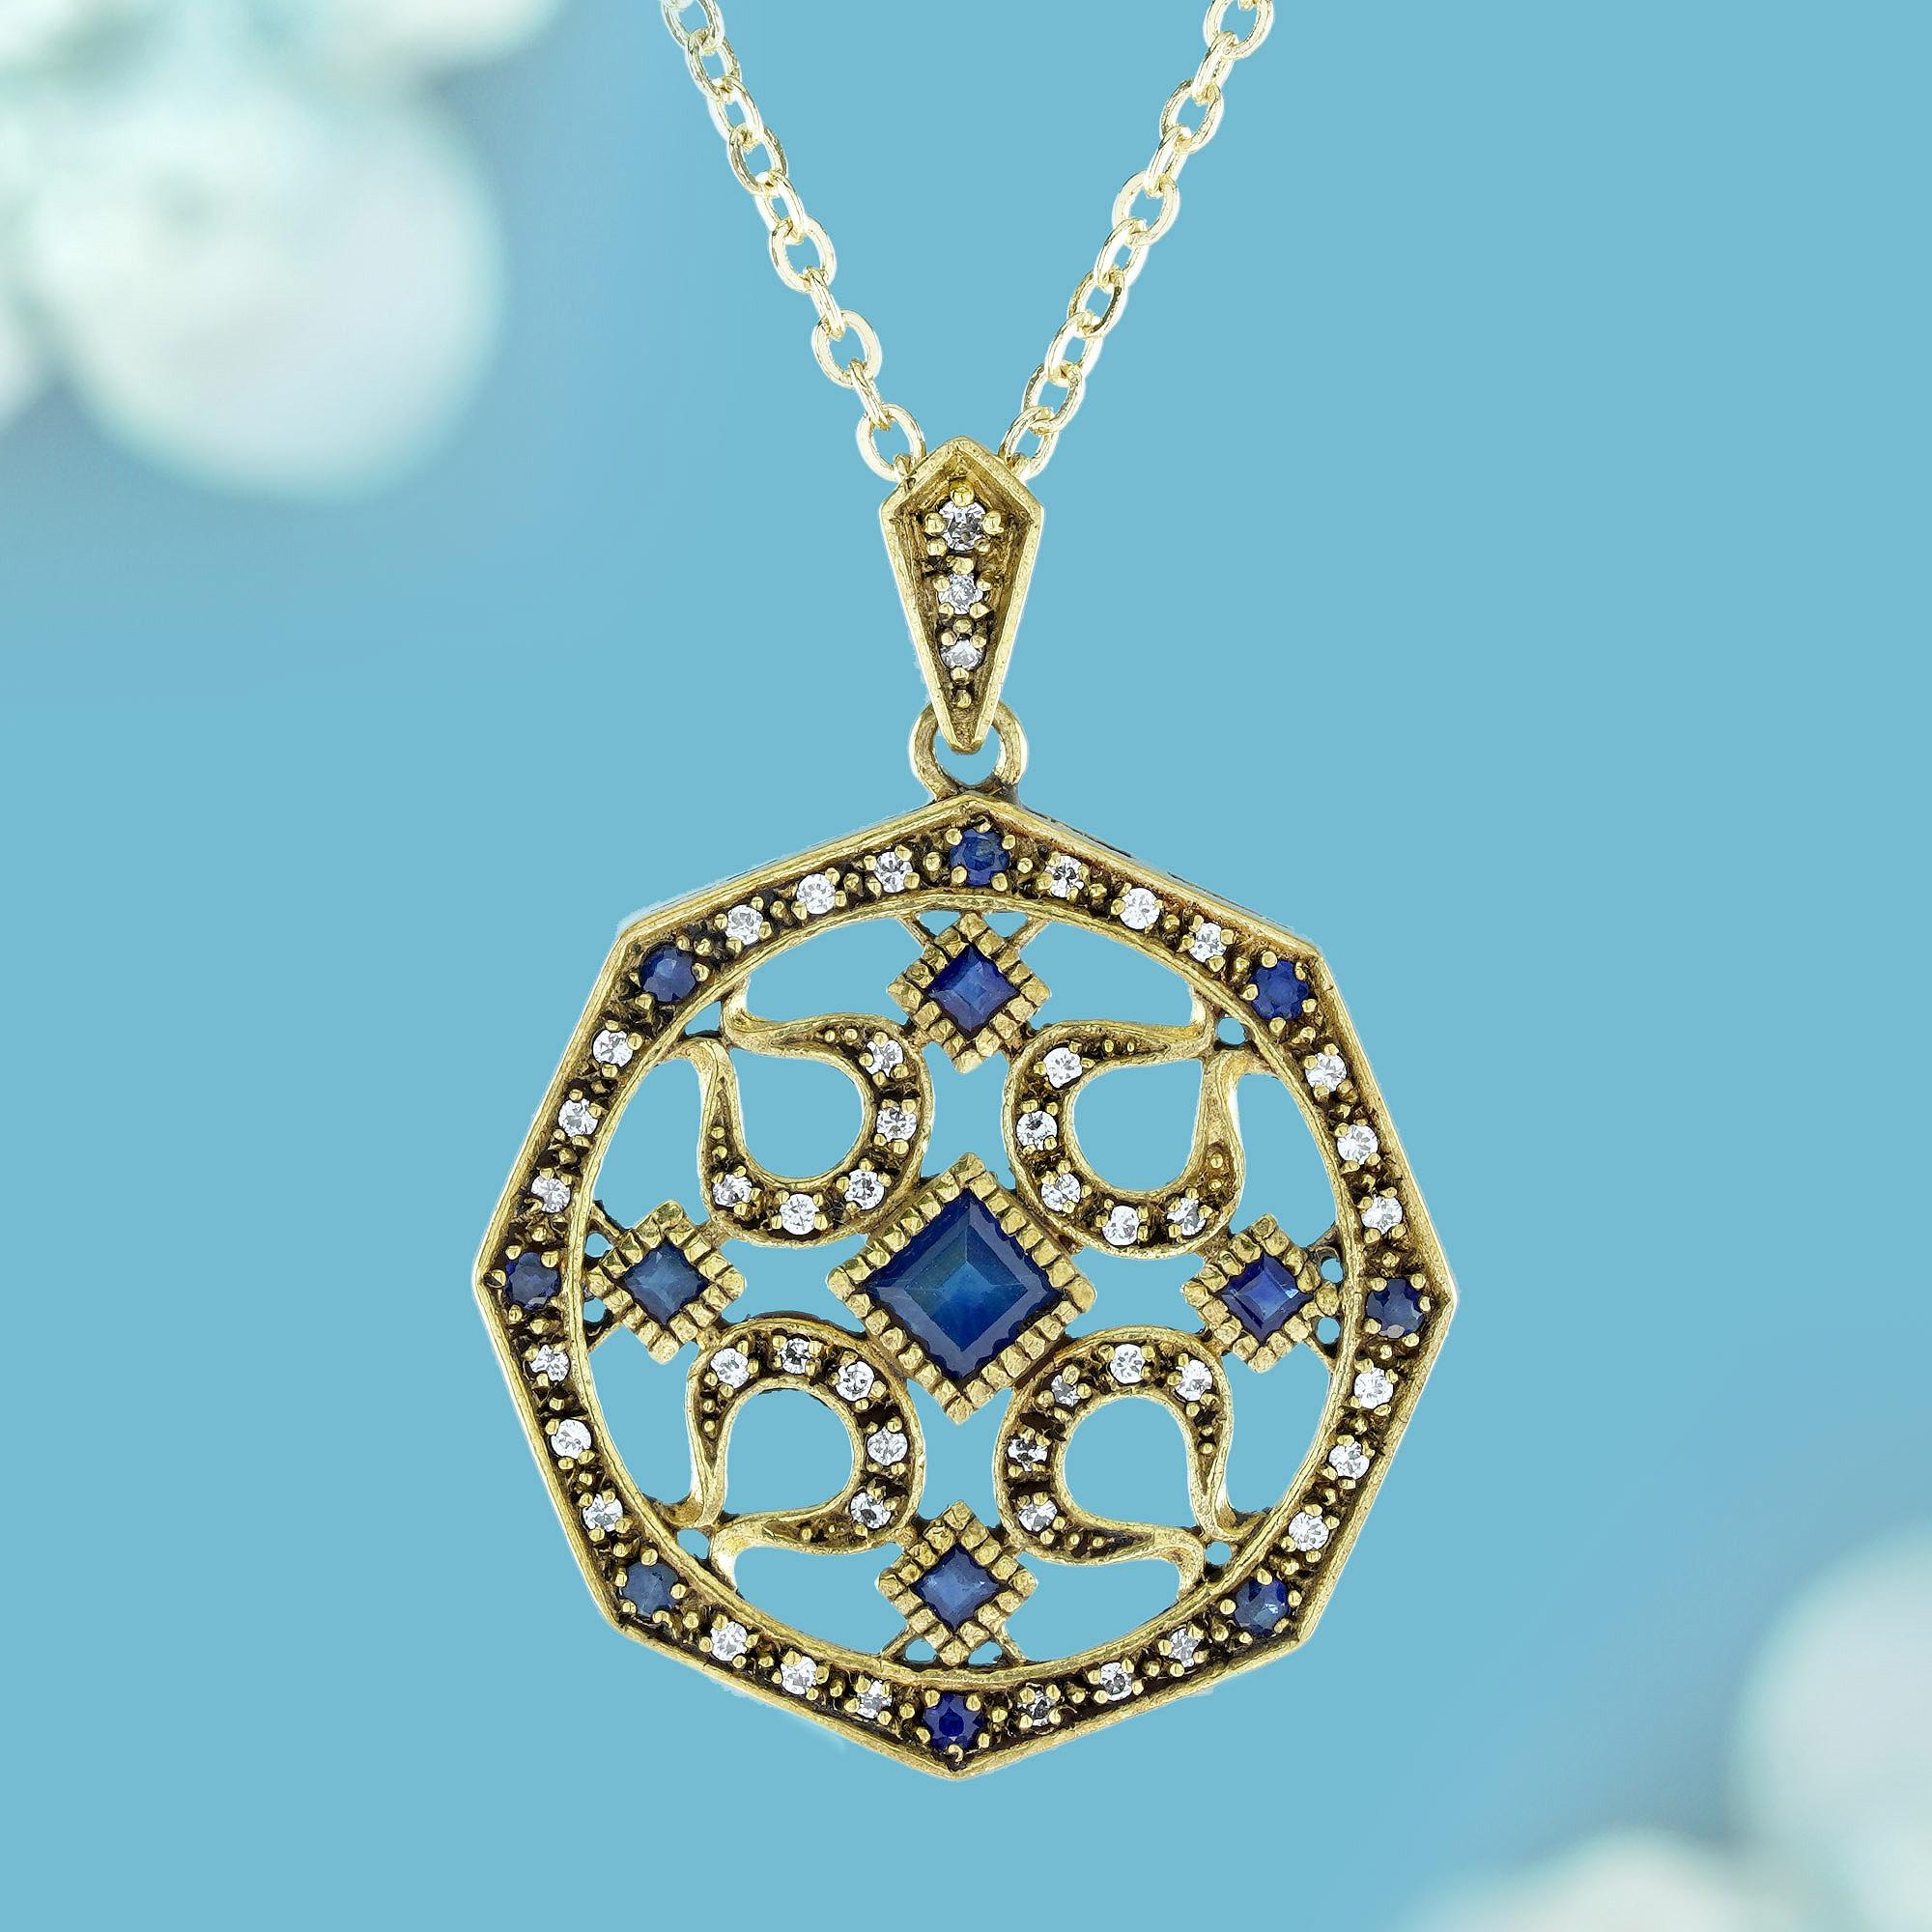 This hexagonal pendant crafted in yellow gold embellished diamonds and a round blue sapphire stationed at every third interval. Within the hexagon, a prominent central square blue sapphire is encircled by four clusters of dazzling diamonds,